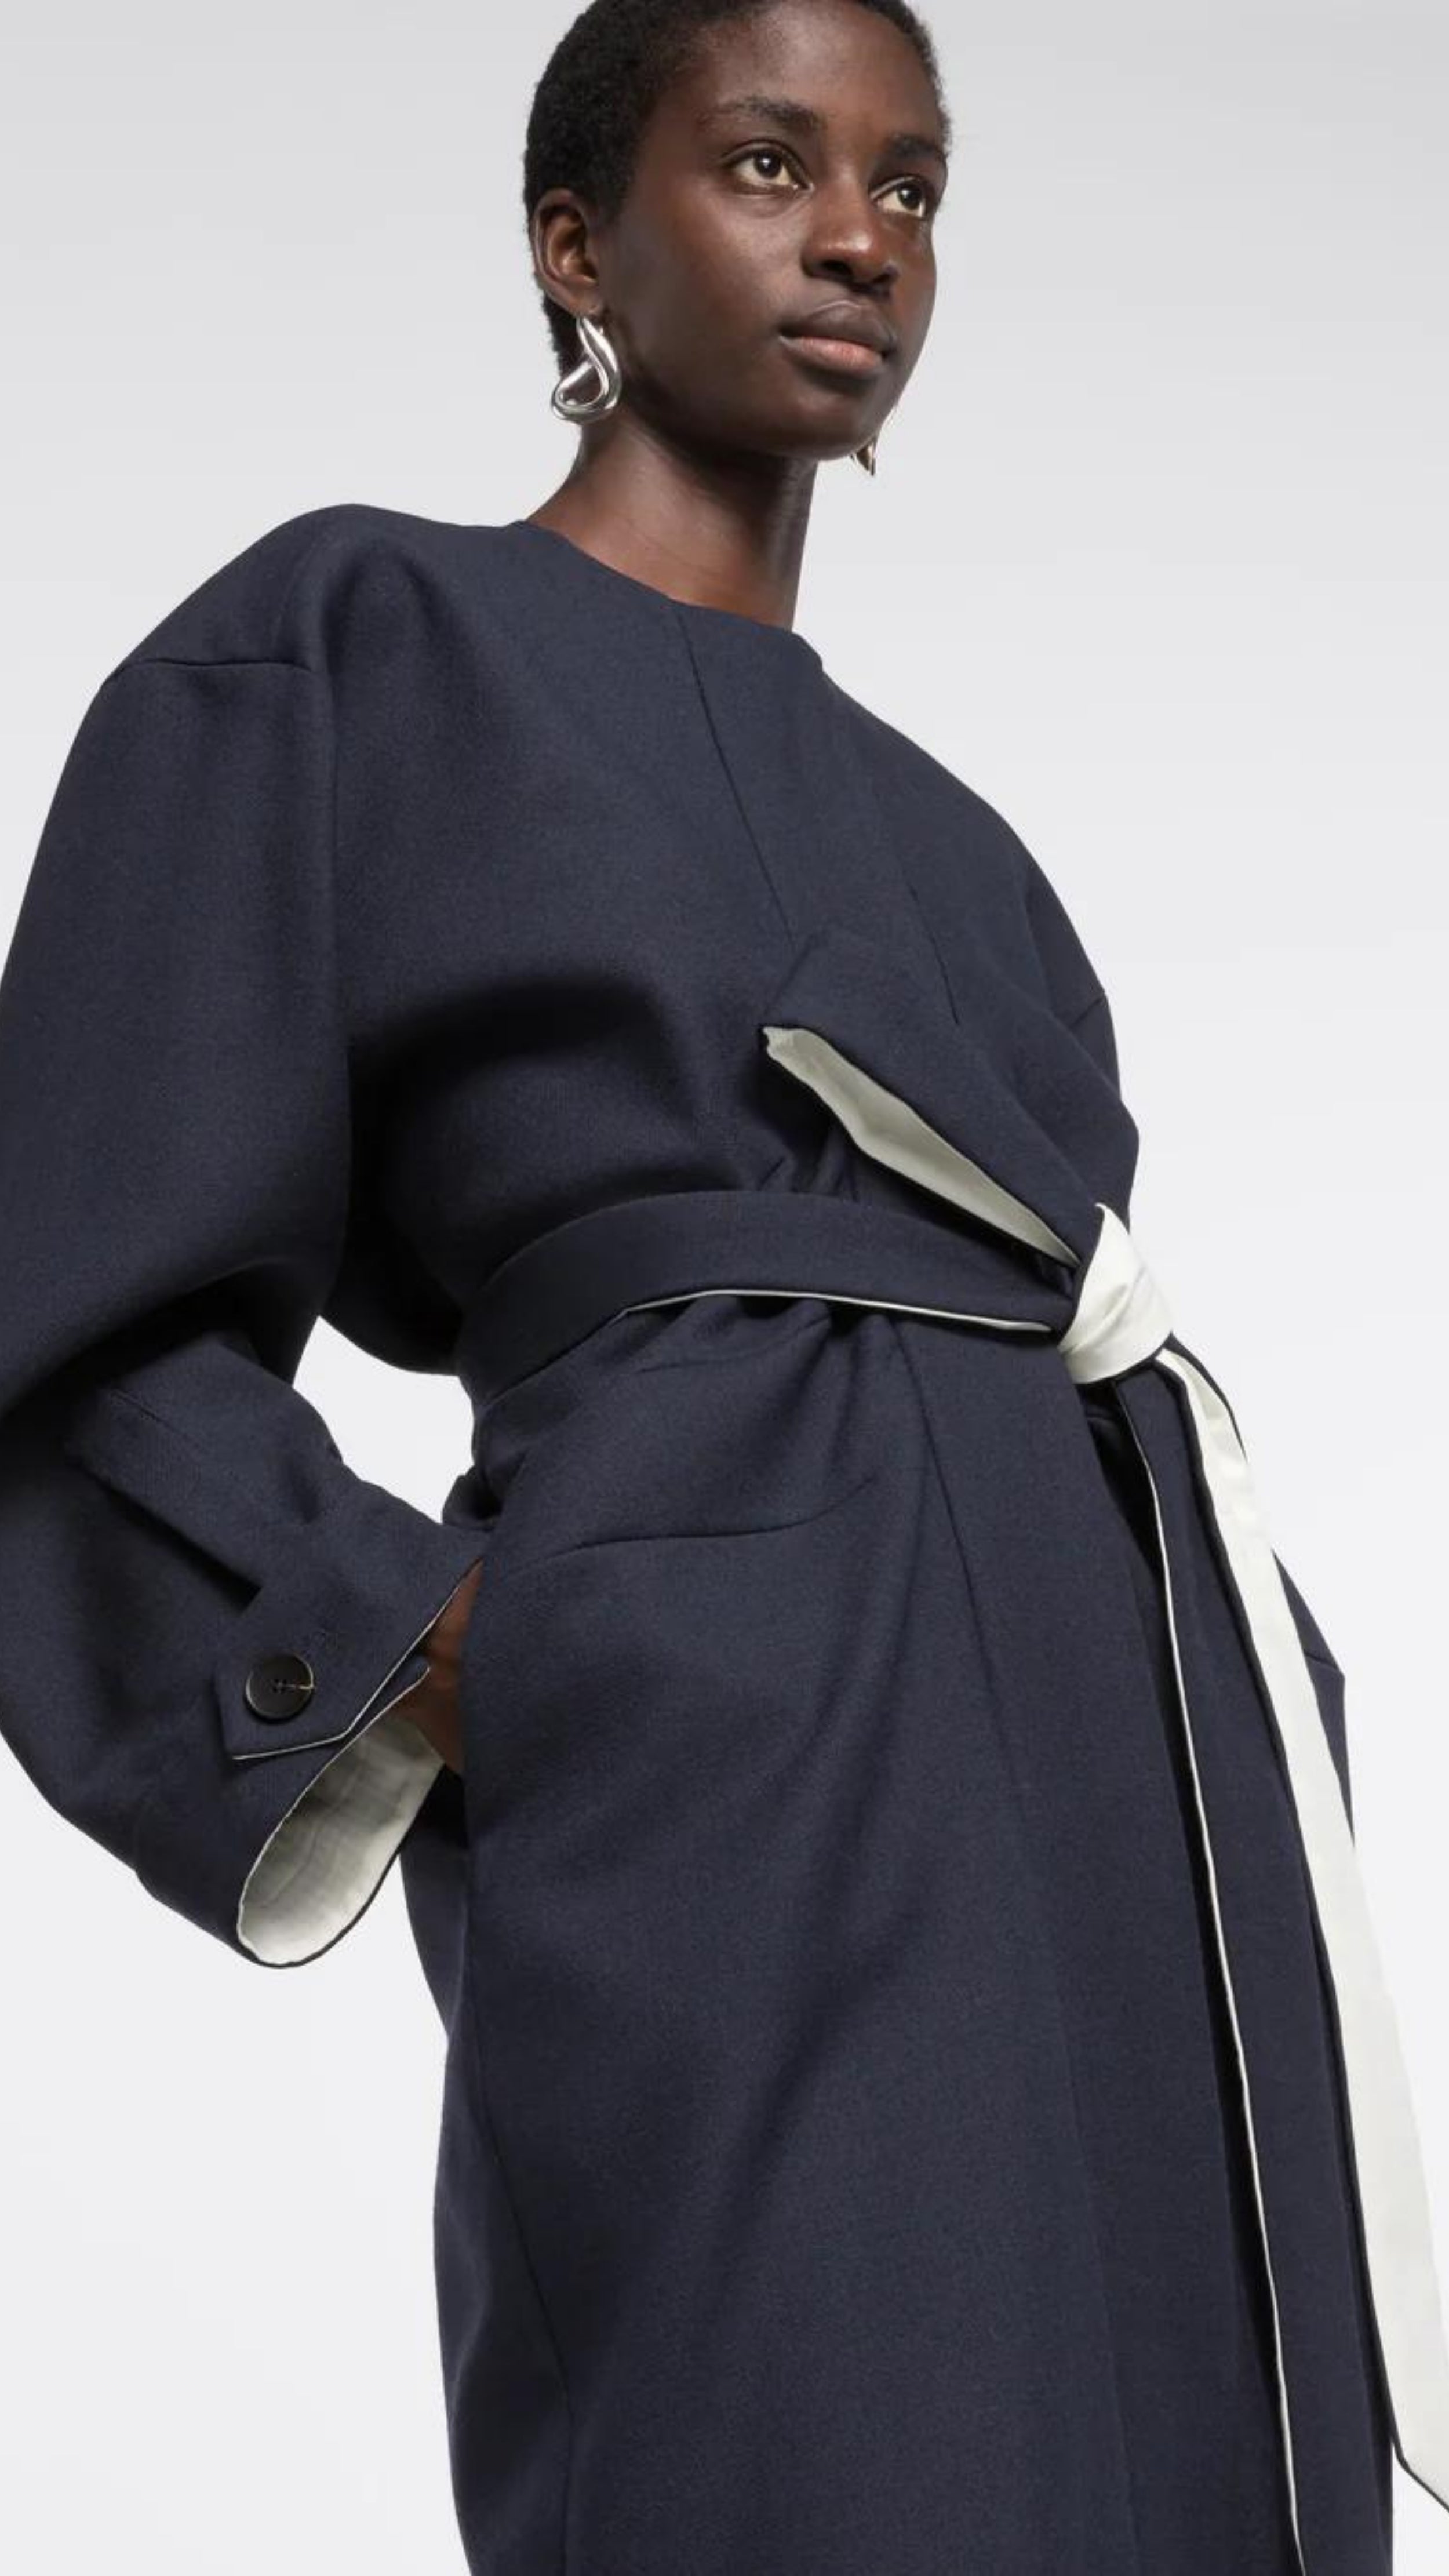 AZ Factory Colville Molly Molloy Lucinda Chambers, Draped Wool Coat in Navy. Wrap around wool coat made in Italy in navy blue. It has an ecru lining and can be worn open or belted for a more fitted style. Shown on model from the front with more detail.